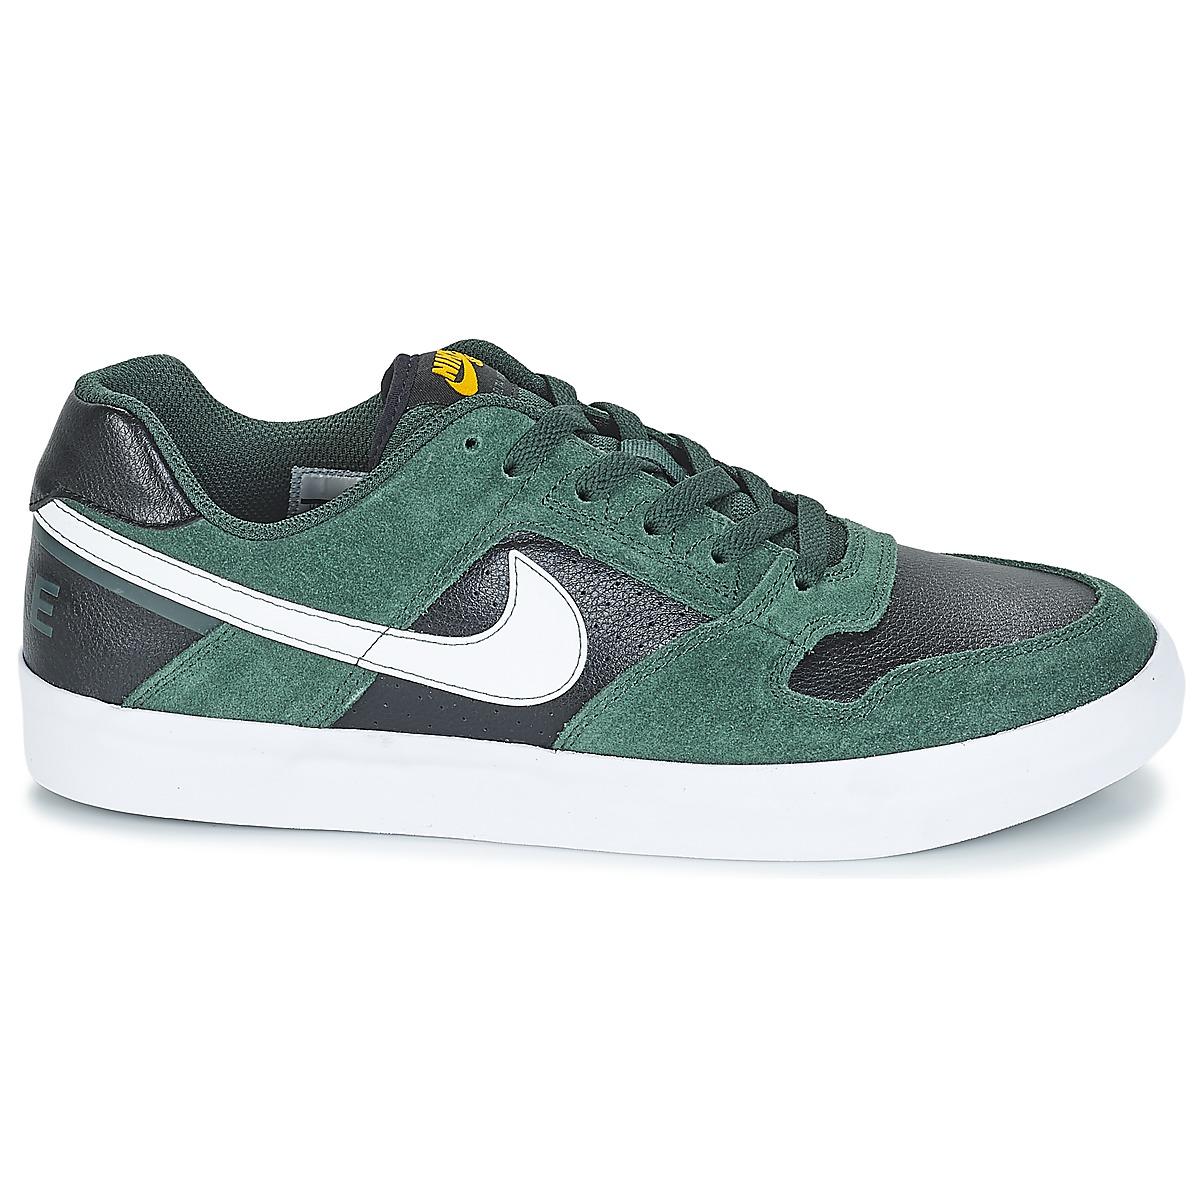 Nike Sb Delta Force Vulc Fitness Shoes in Green for Men - Lyst